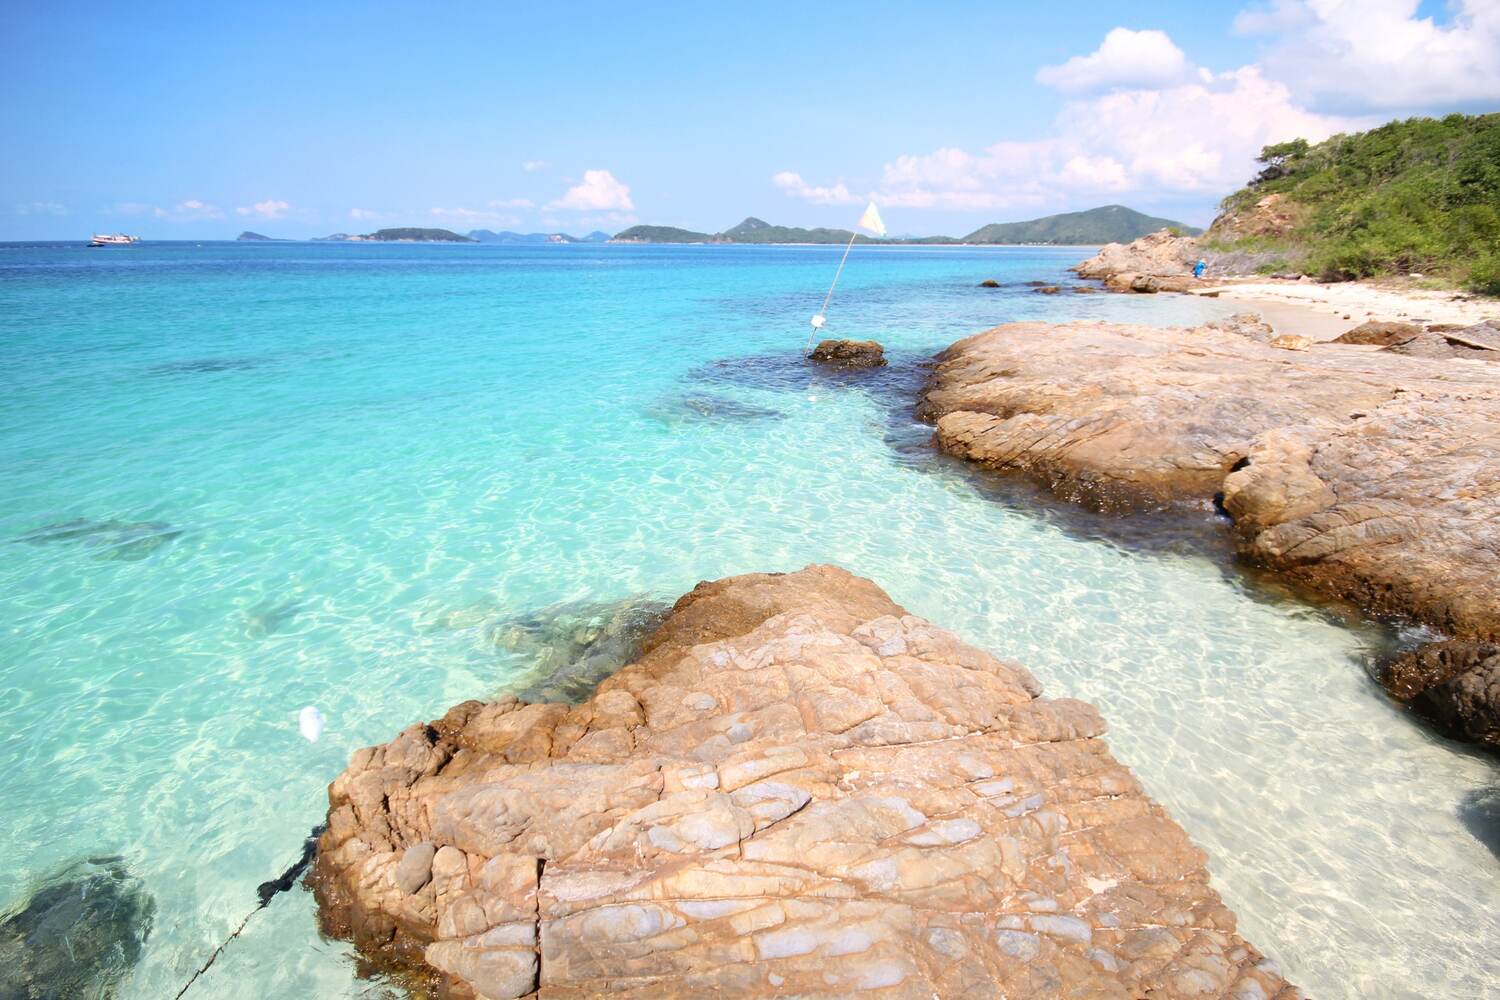 A tropical beach with clear turquoise water, rocks, and a view of distant islands under a blue sky.